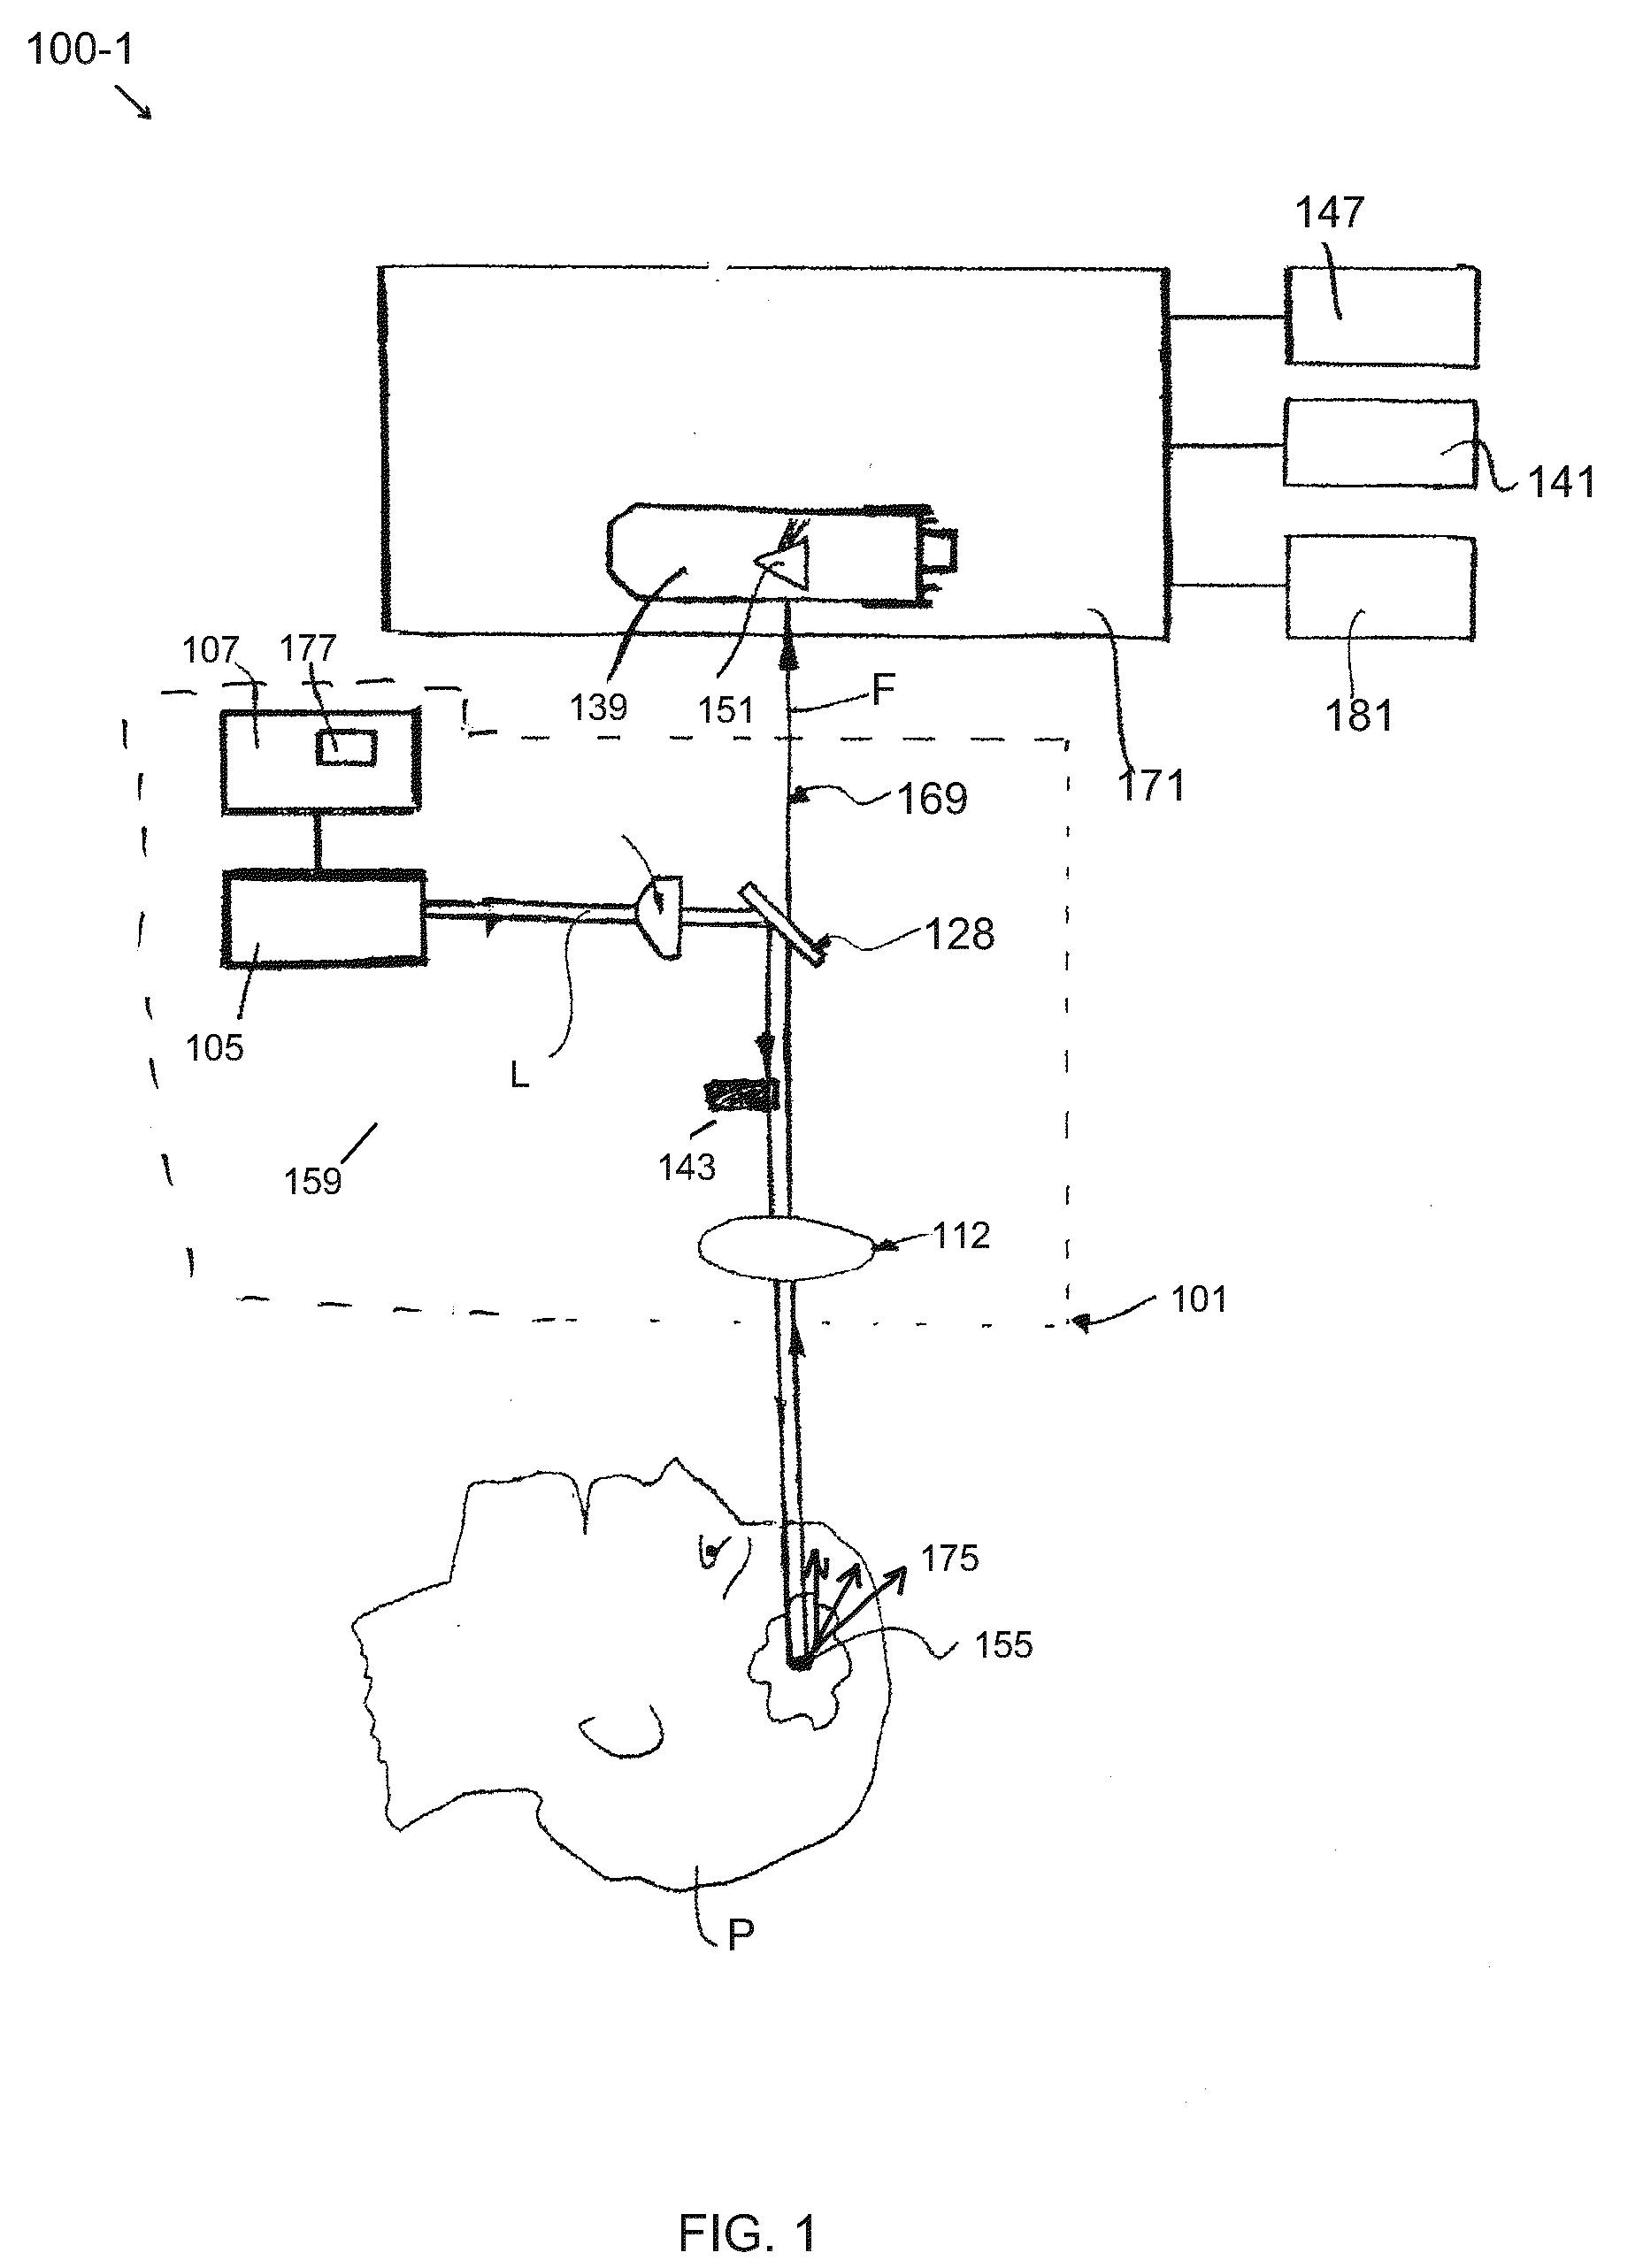 Non-imaging, weakly focused fluorescence emission apparatus and method